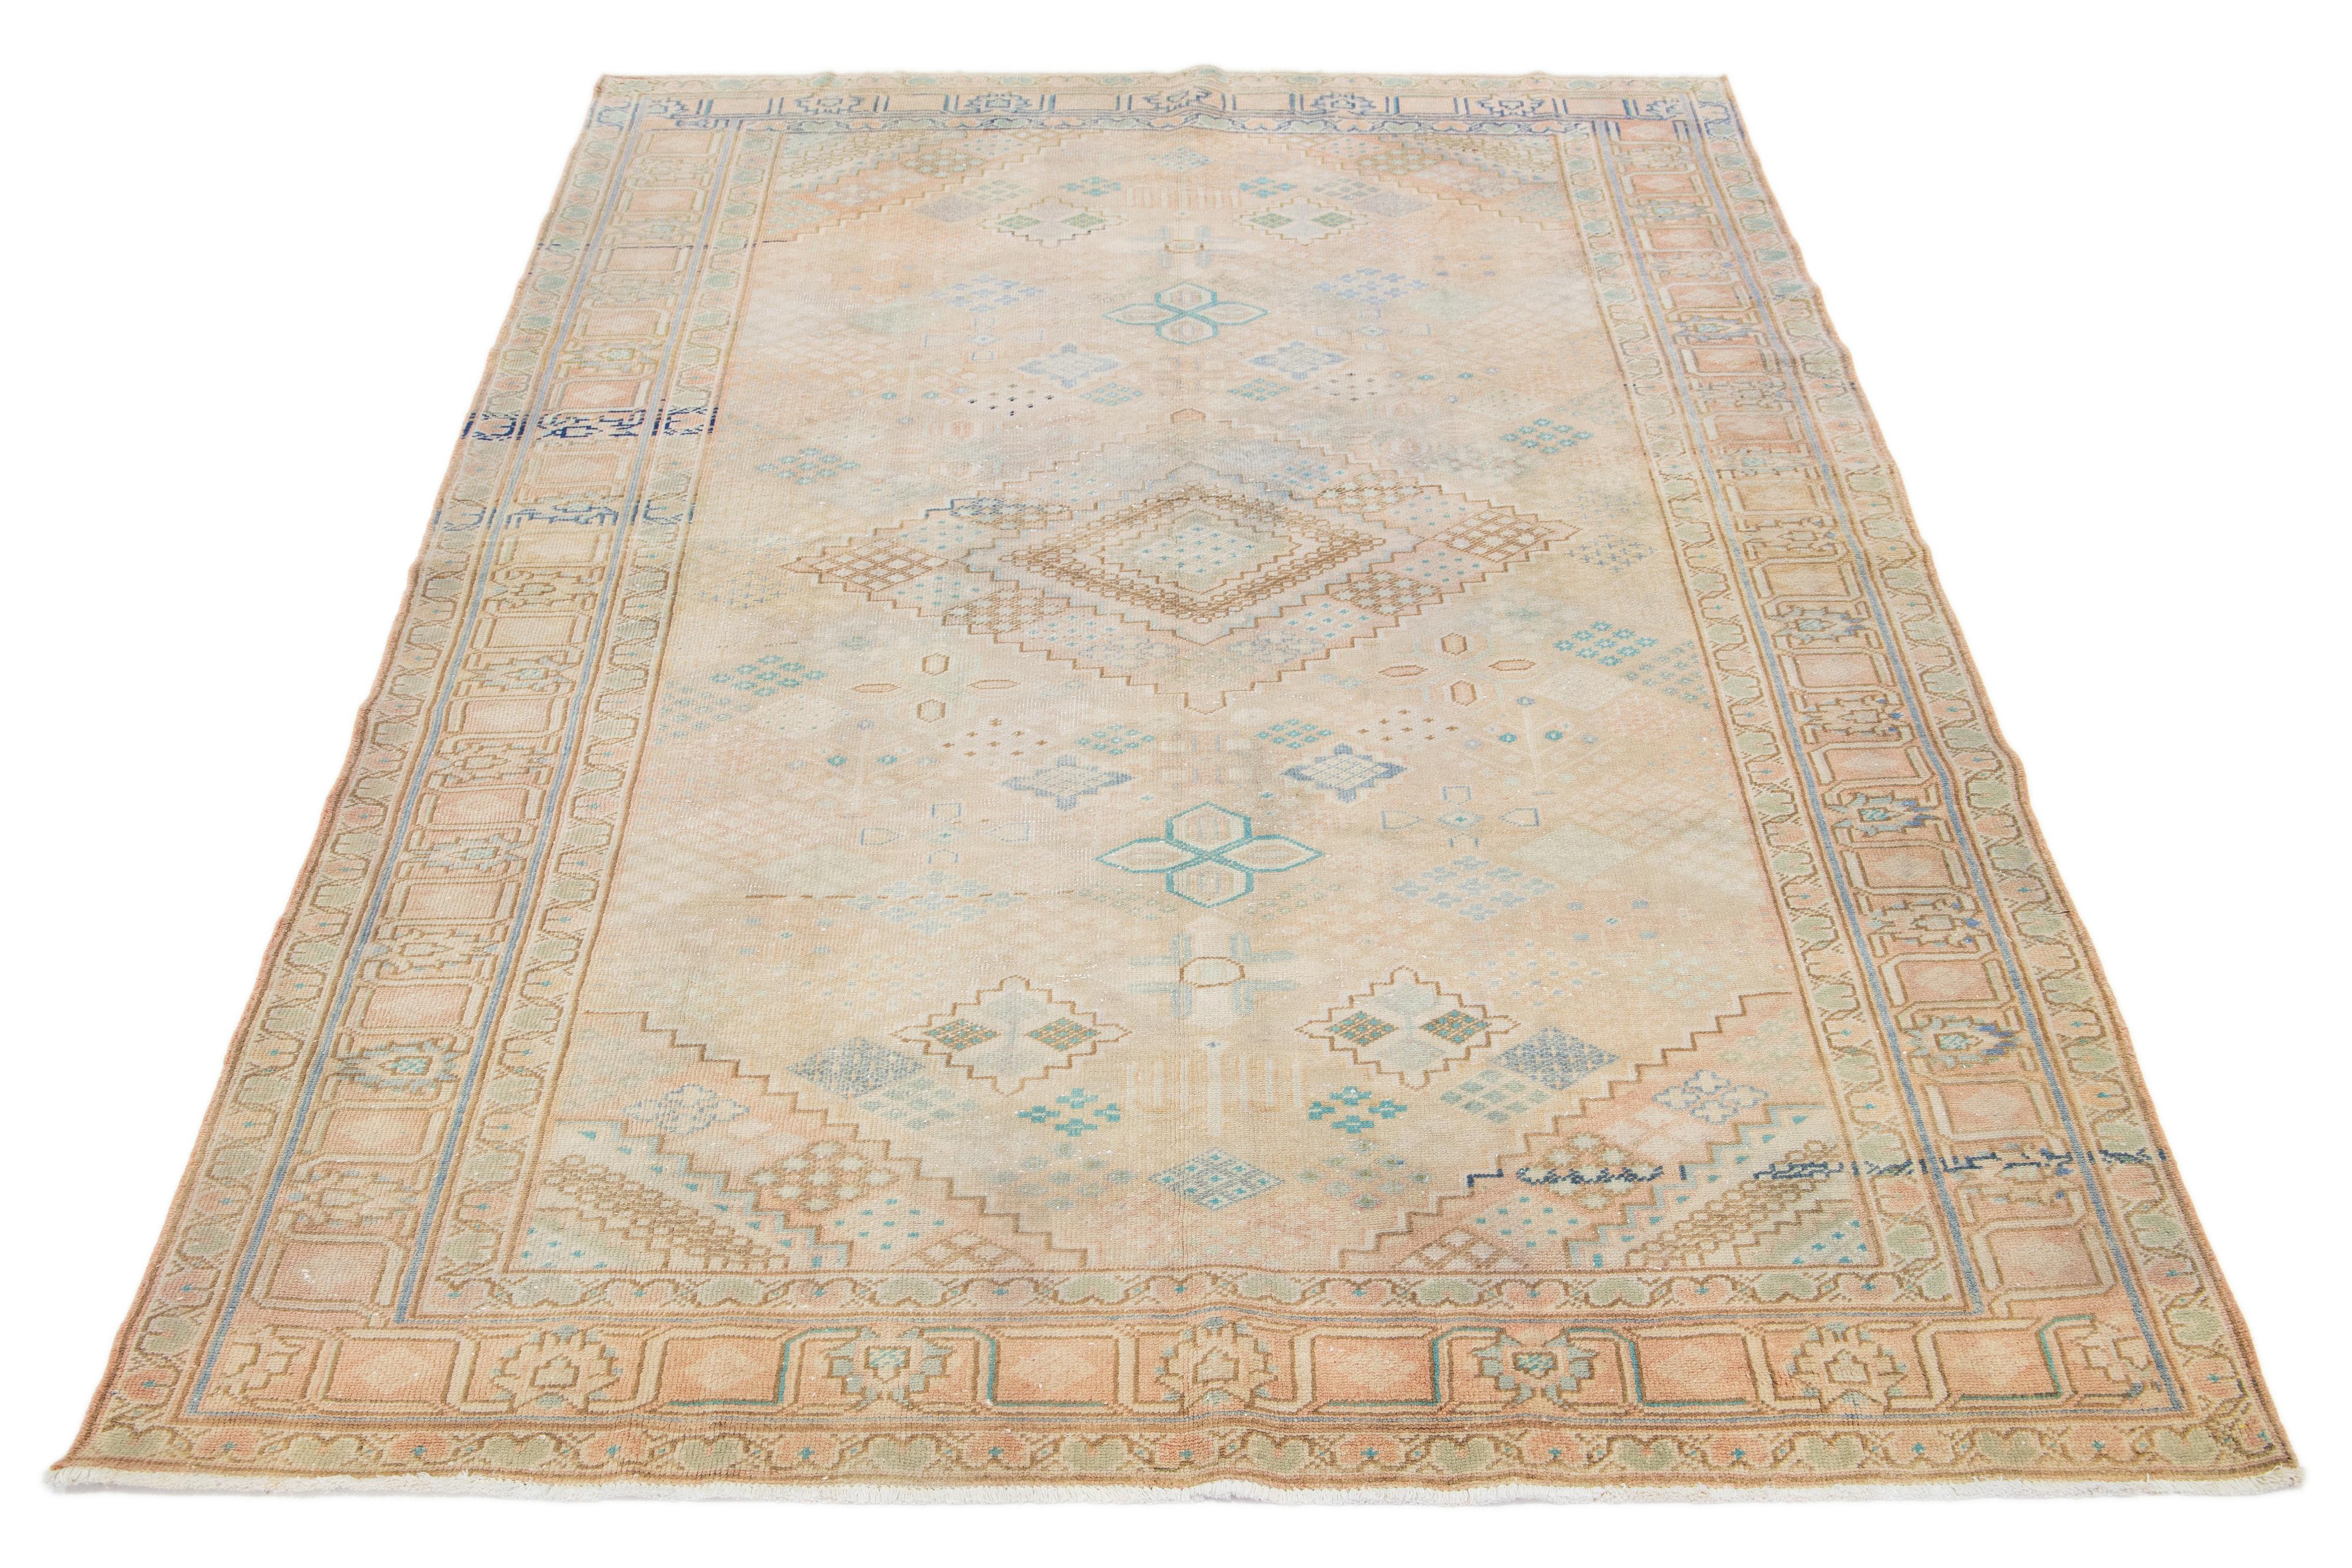 This Josheghan Persian wool rug boasts a captivating antique allure. Meticulously hand-knotted using premium quality wool, it features an alluring beige field with peach, green, and blue accents arranged in a mesmerizing all-over geometric